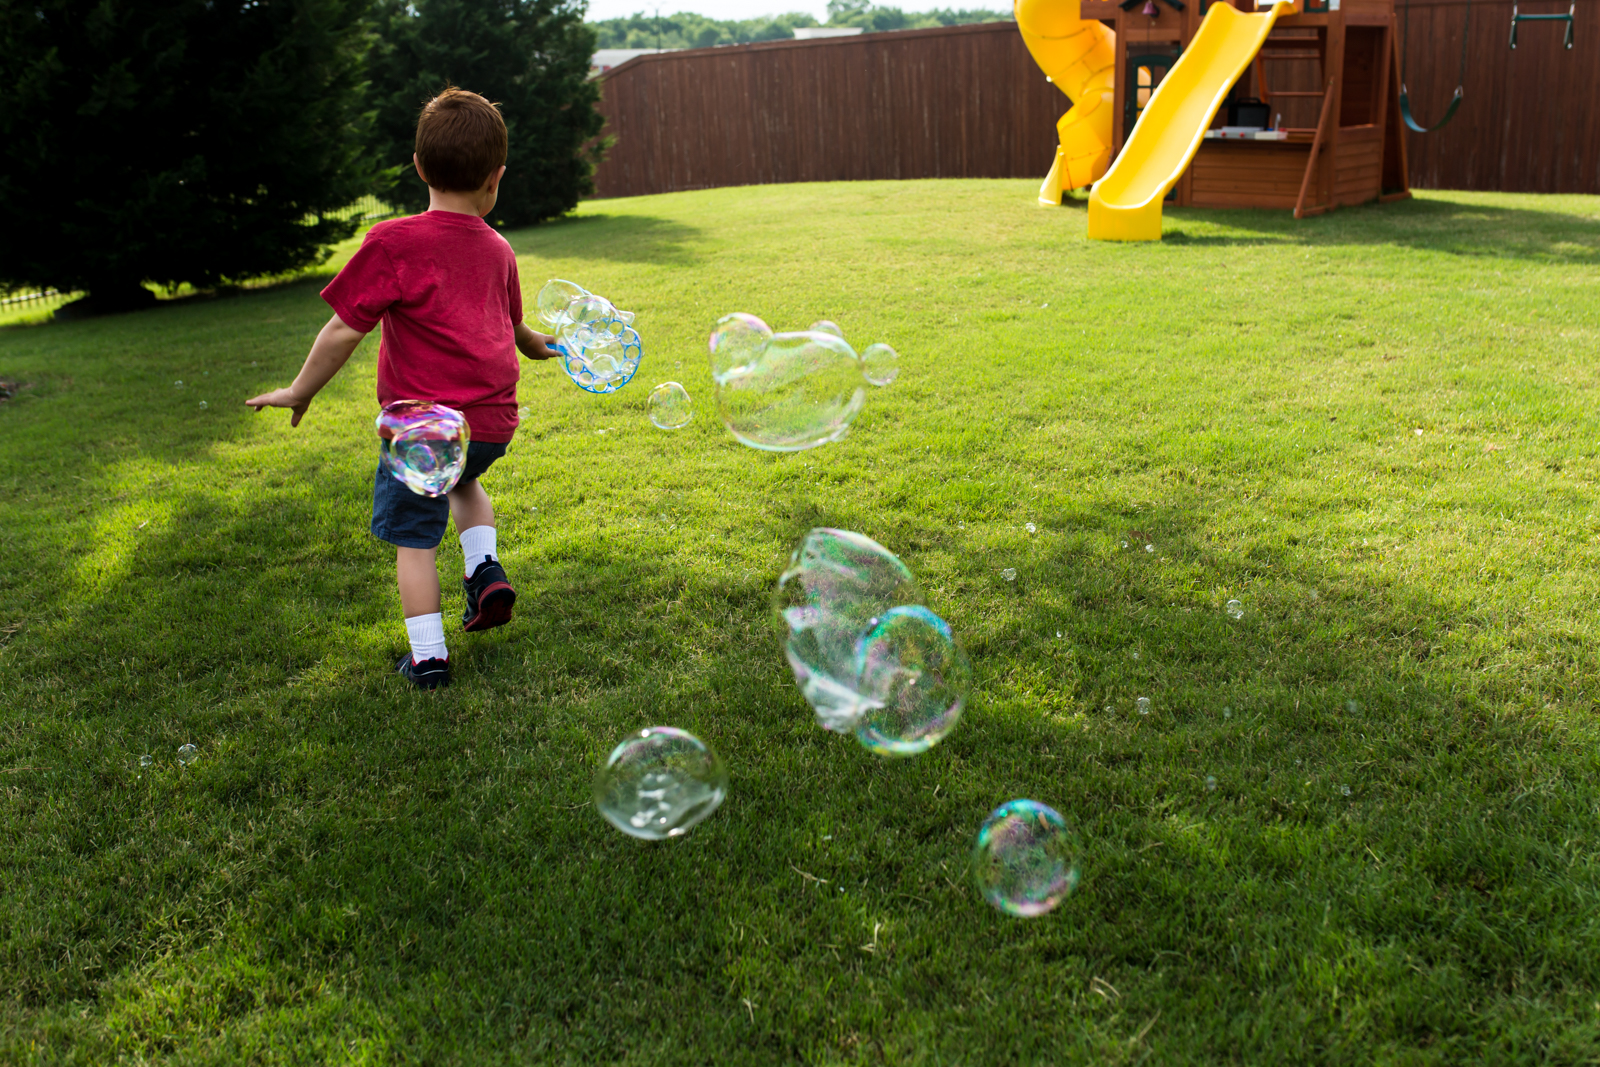 Lawren Rose Photography captures a photo of a red headed little boy running in the bright green grass with giant bubbles flowing behind him in McKinney Texas